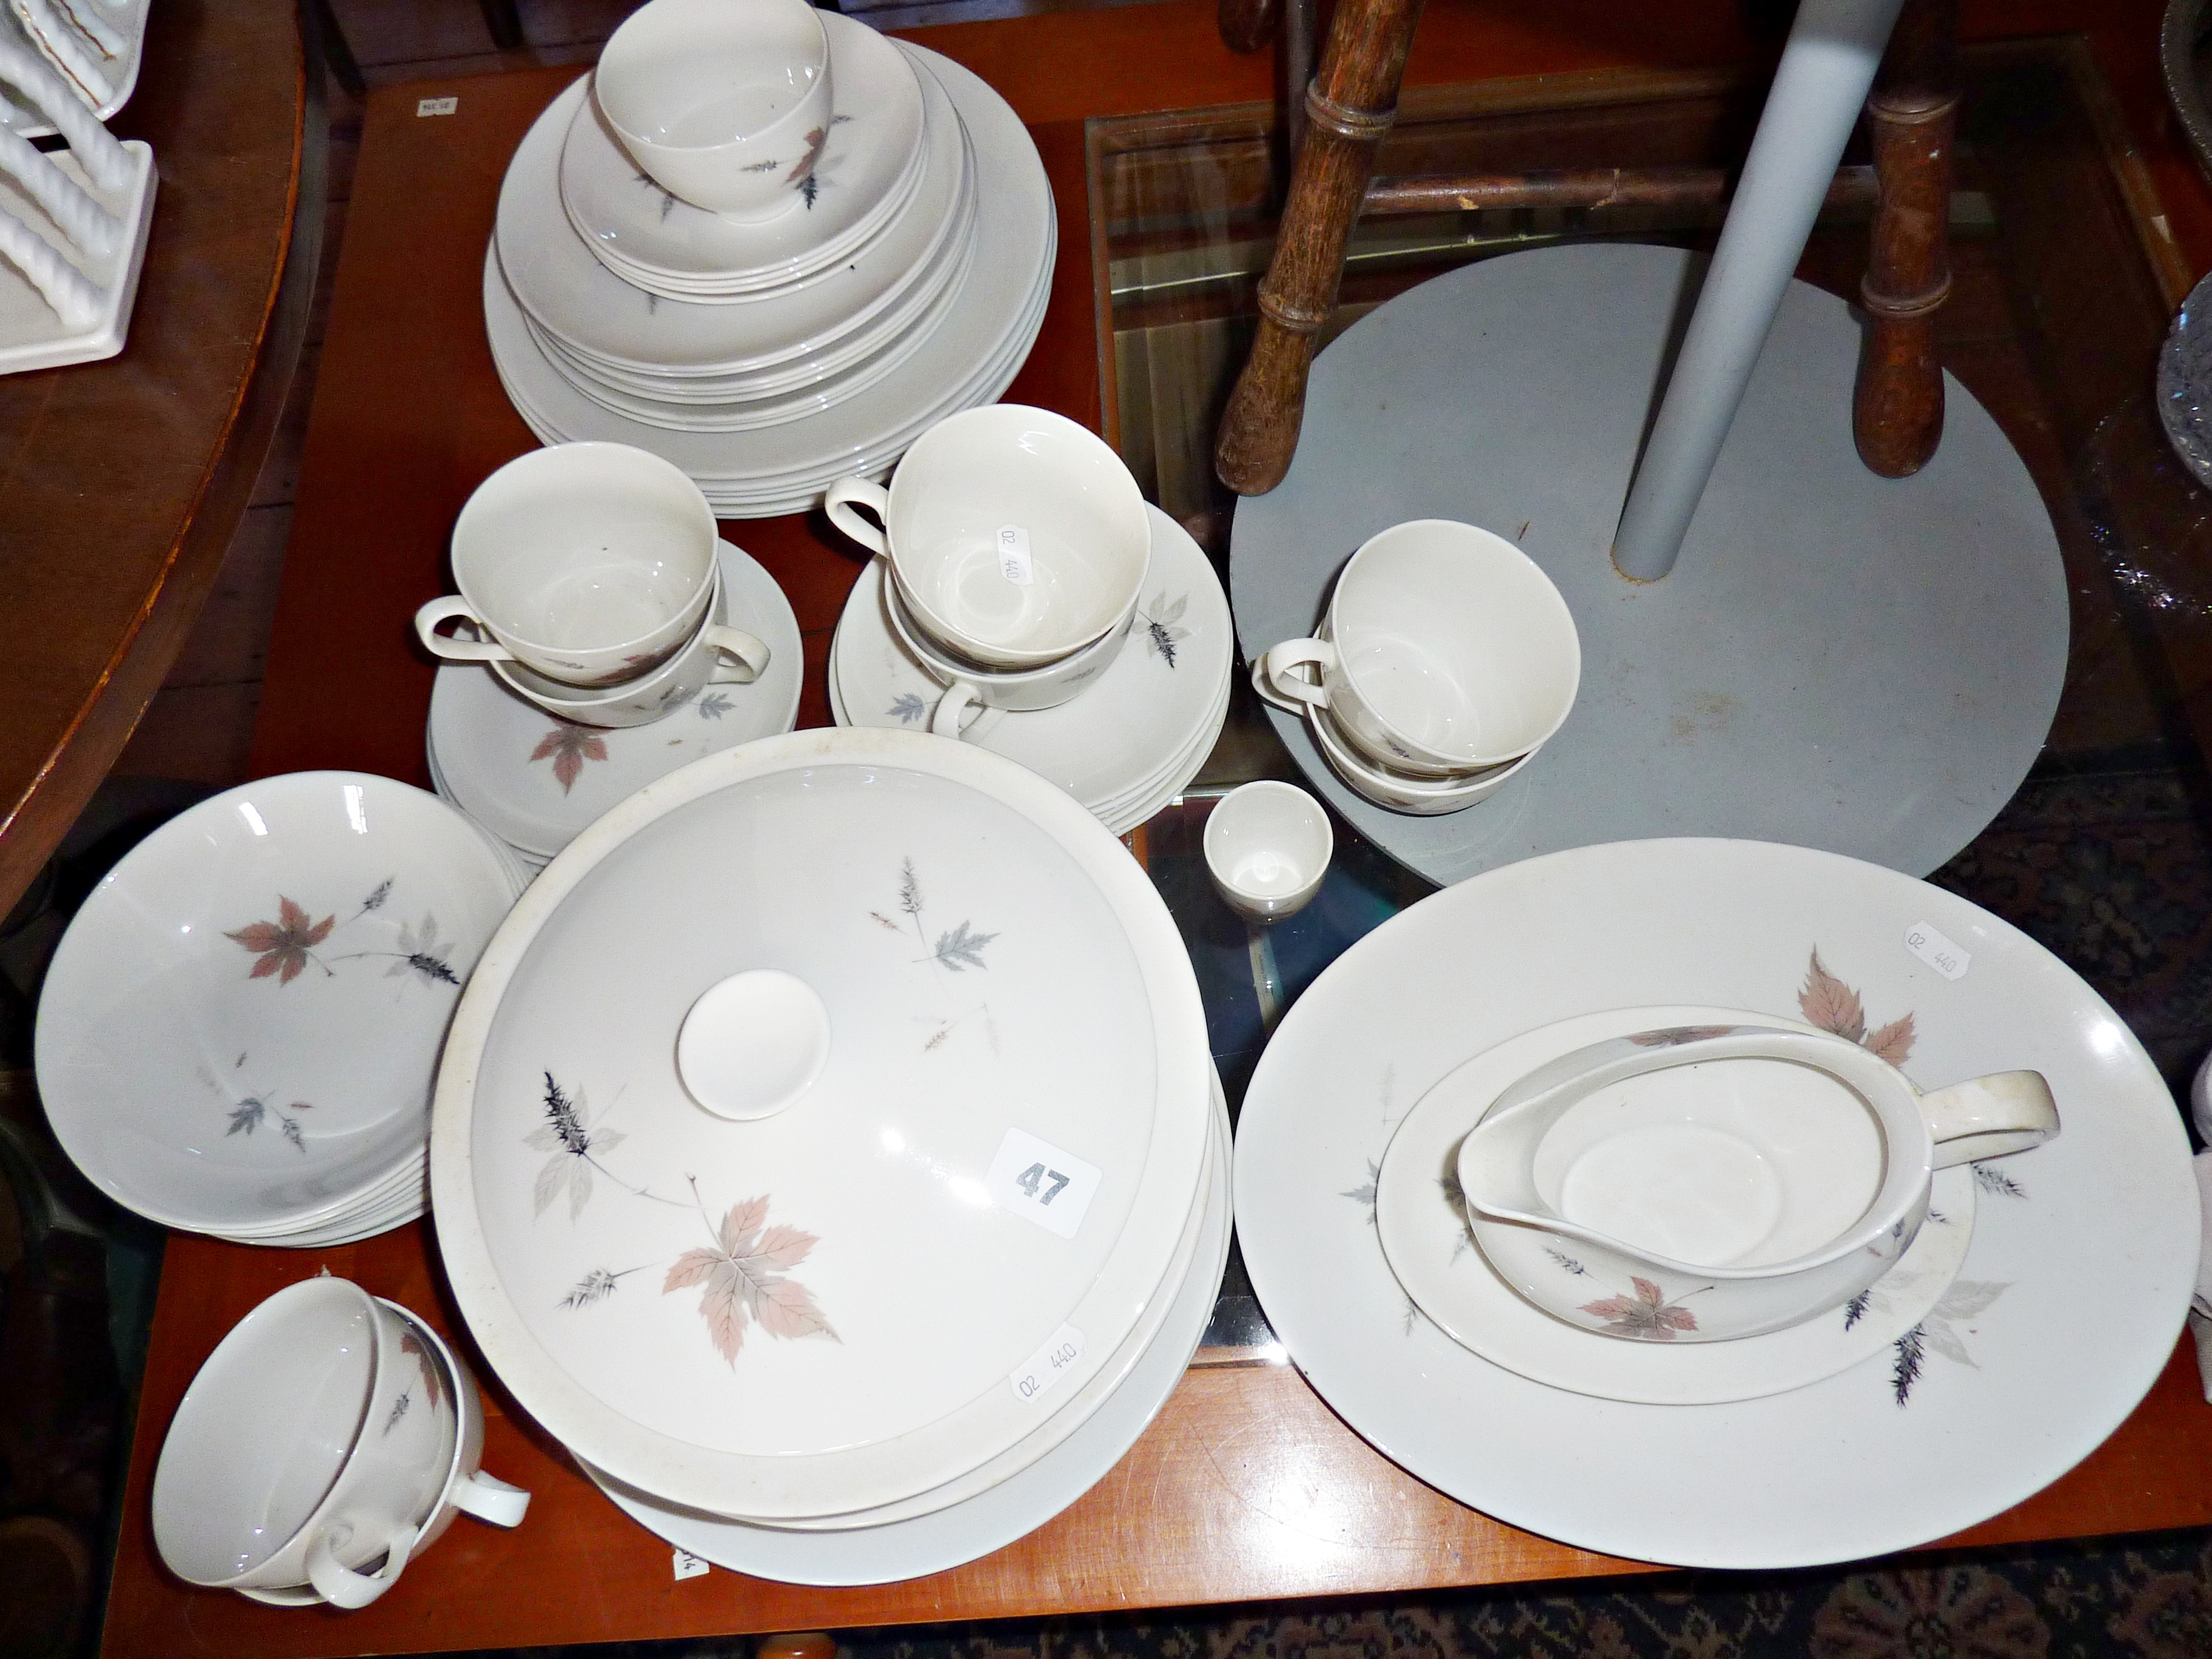 Royal Doulton Tumbling Leaves dinnerware including tureen, plates, cups & saucers, gravy boat on